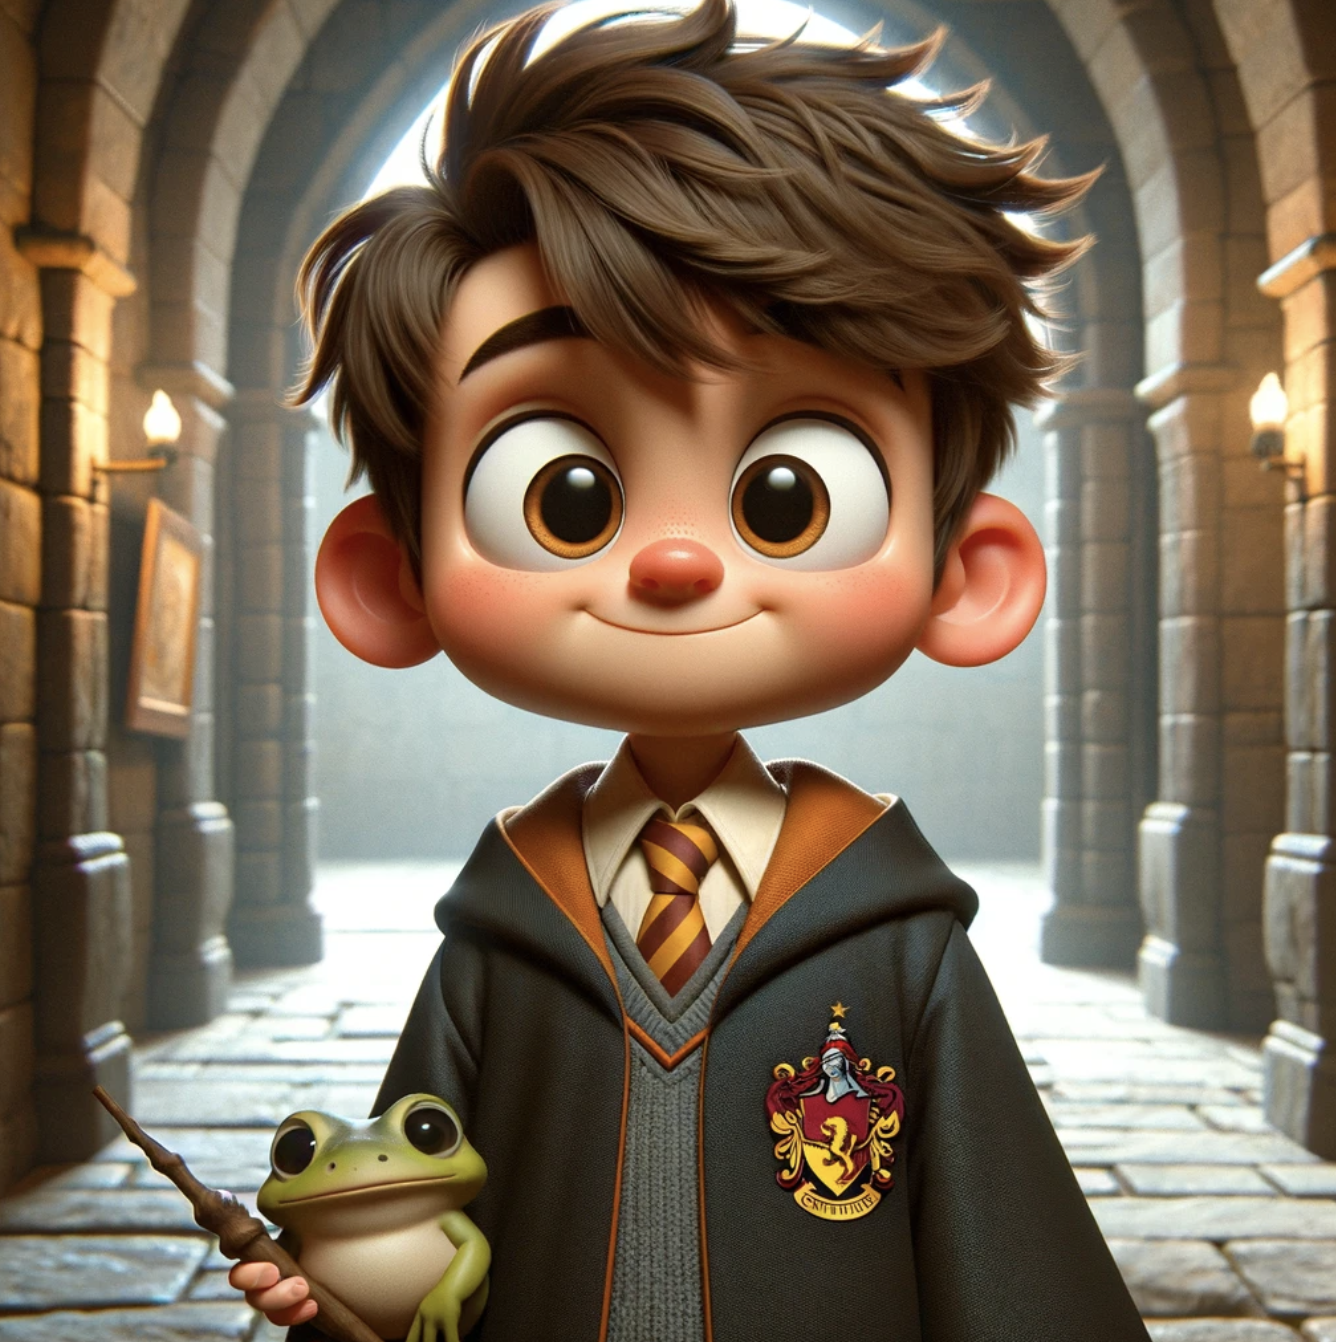 Illustration of a young wizard in school robes holding a wand, with a frog companion, evoking a magical theme